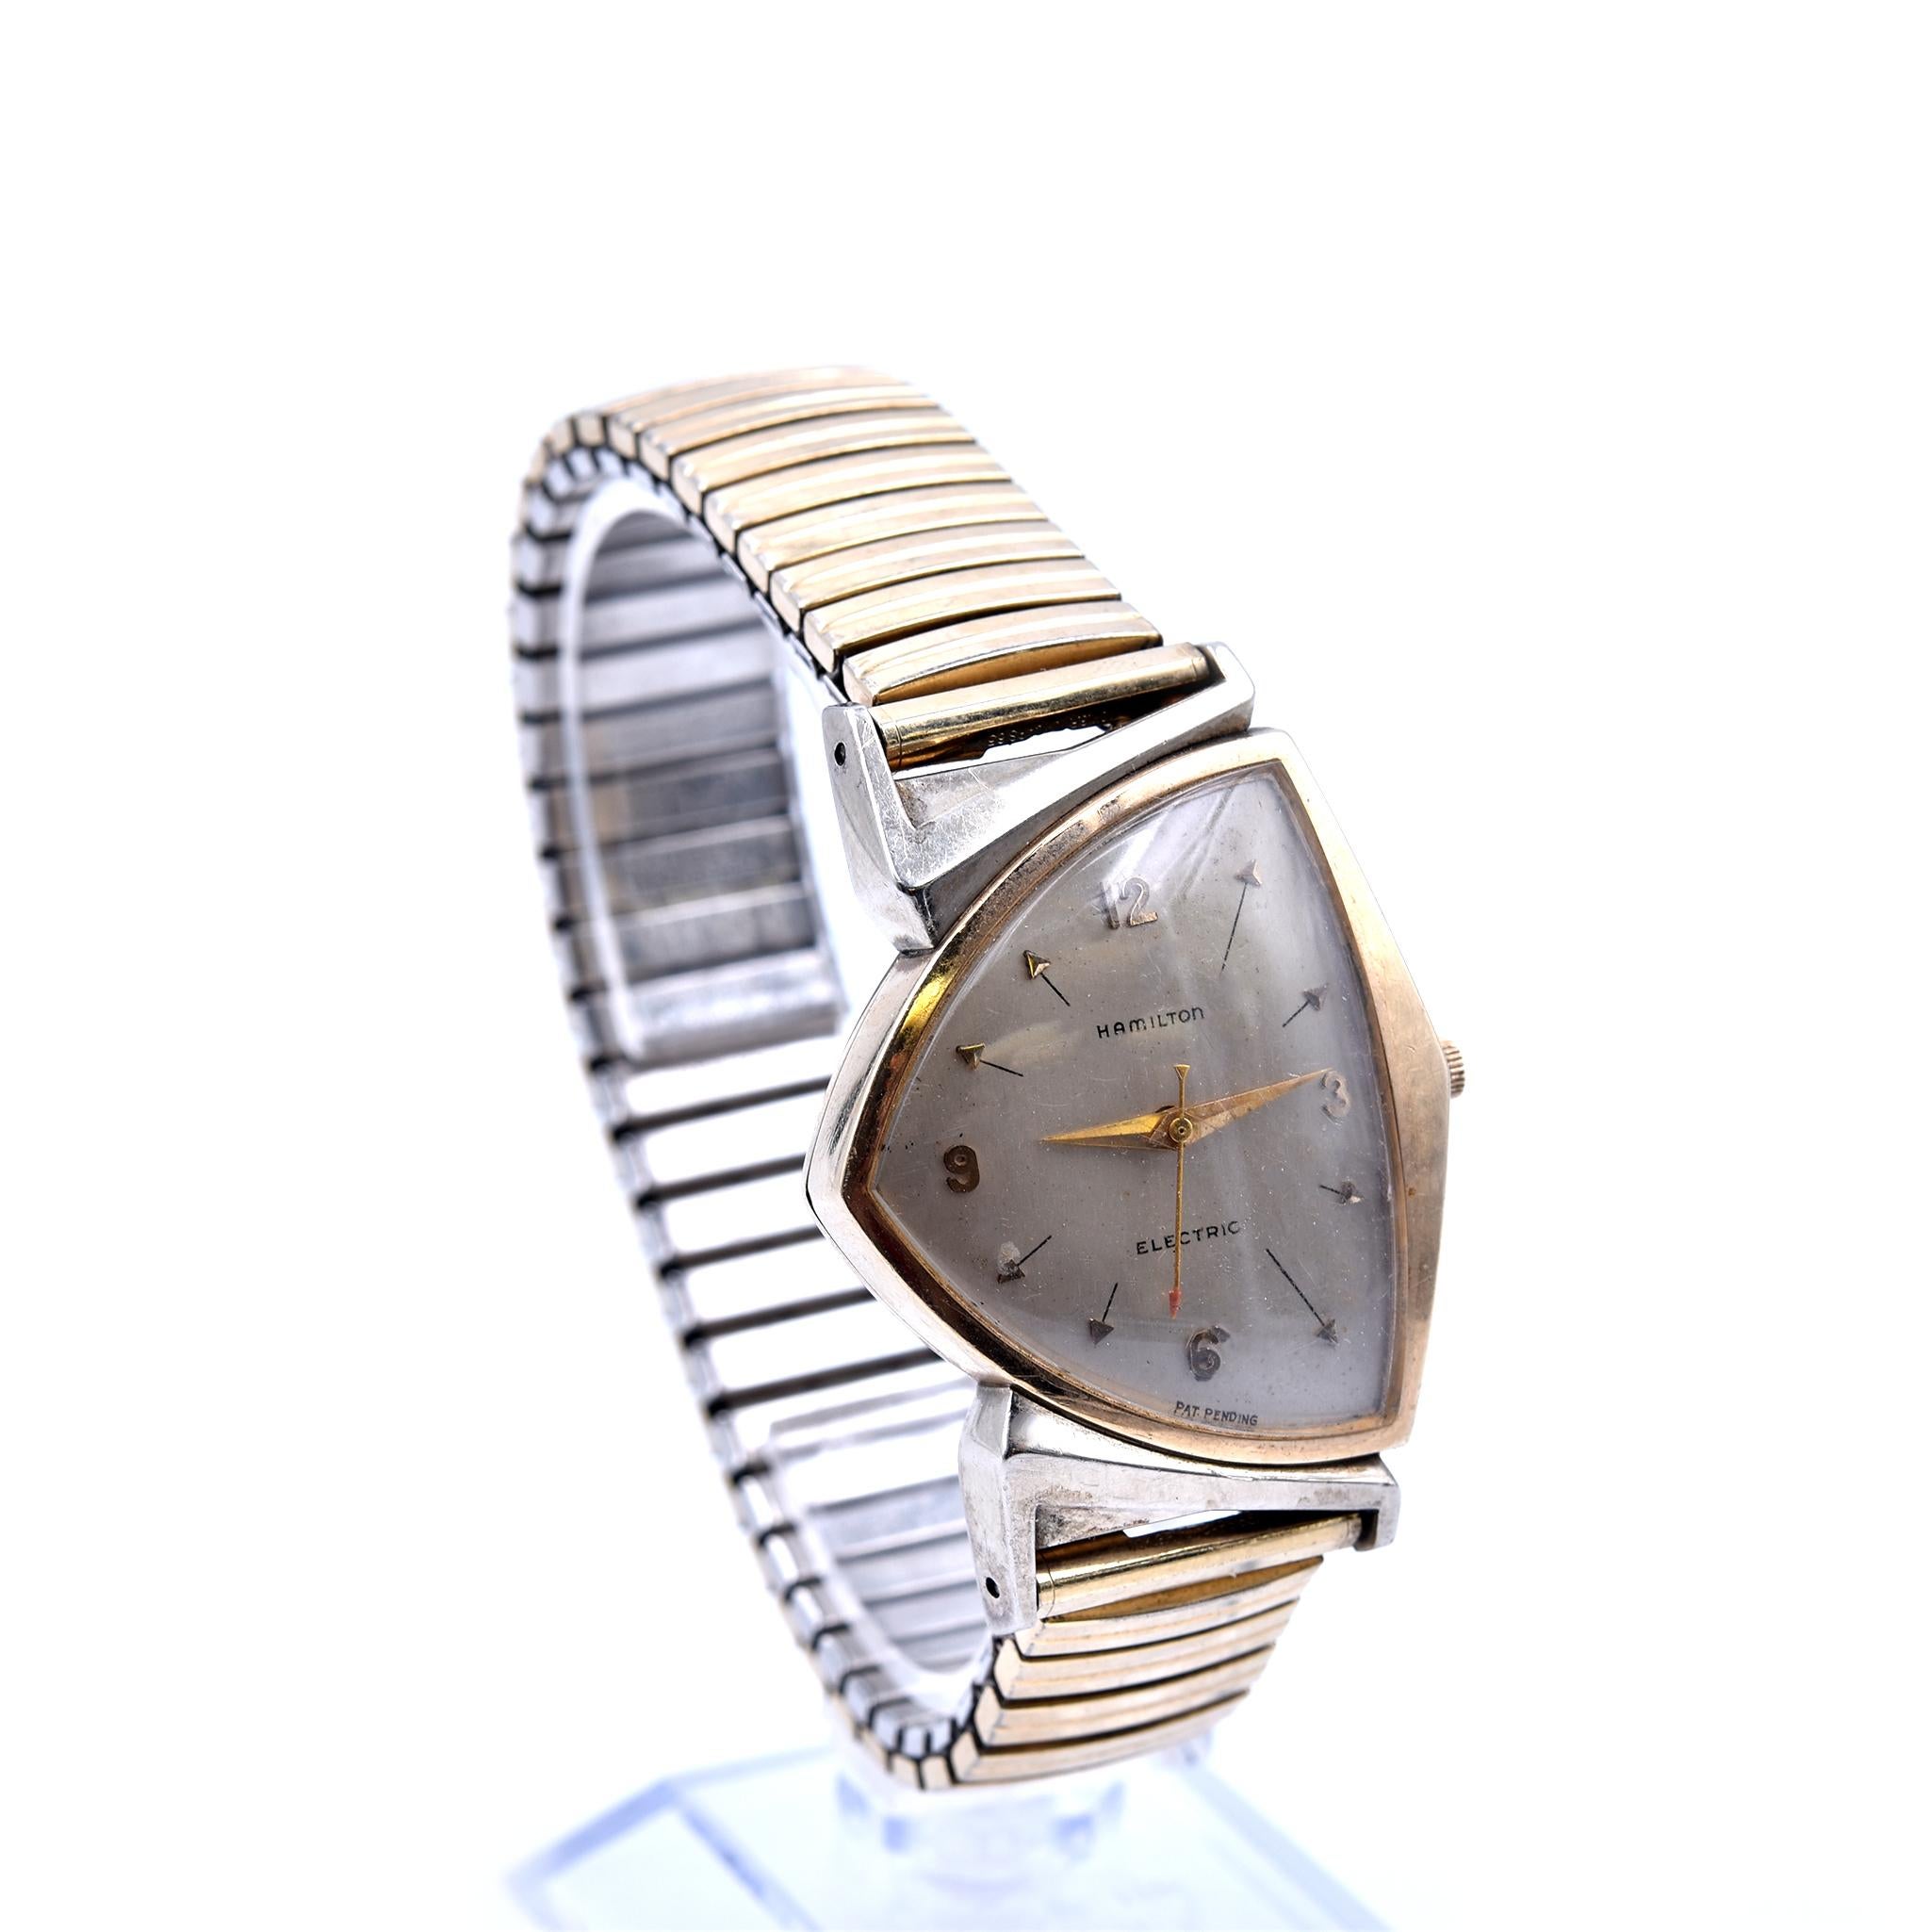 Movement: quartz
Function: hours, minutes, seconds
Case: “arrowhead” shaped yellow gold-filled case with flexible bracelet, plastic crystal
Dial: champagne dial with gold arabic numerals, gold indexes
Serial: S342317
**This watch is not working,